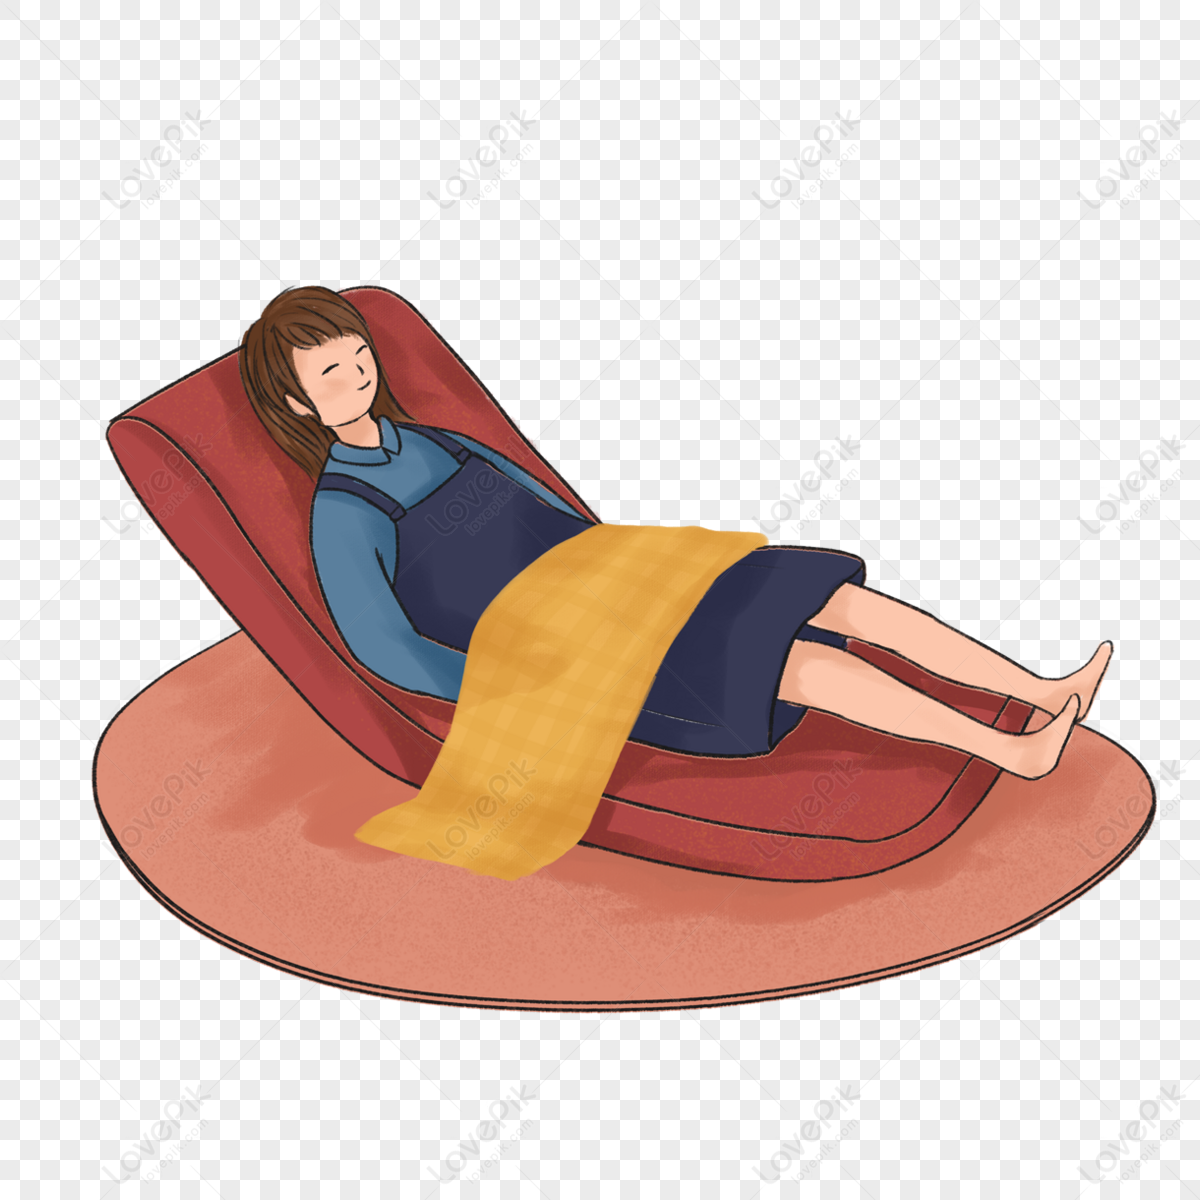 Red Recliner Lazy Clip Art Doze Off Undisciplined National Lazy Day PNG Image Free Download And